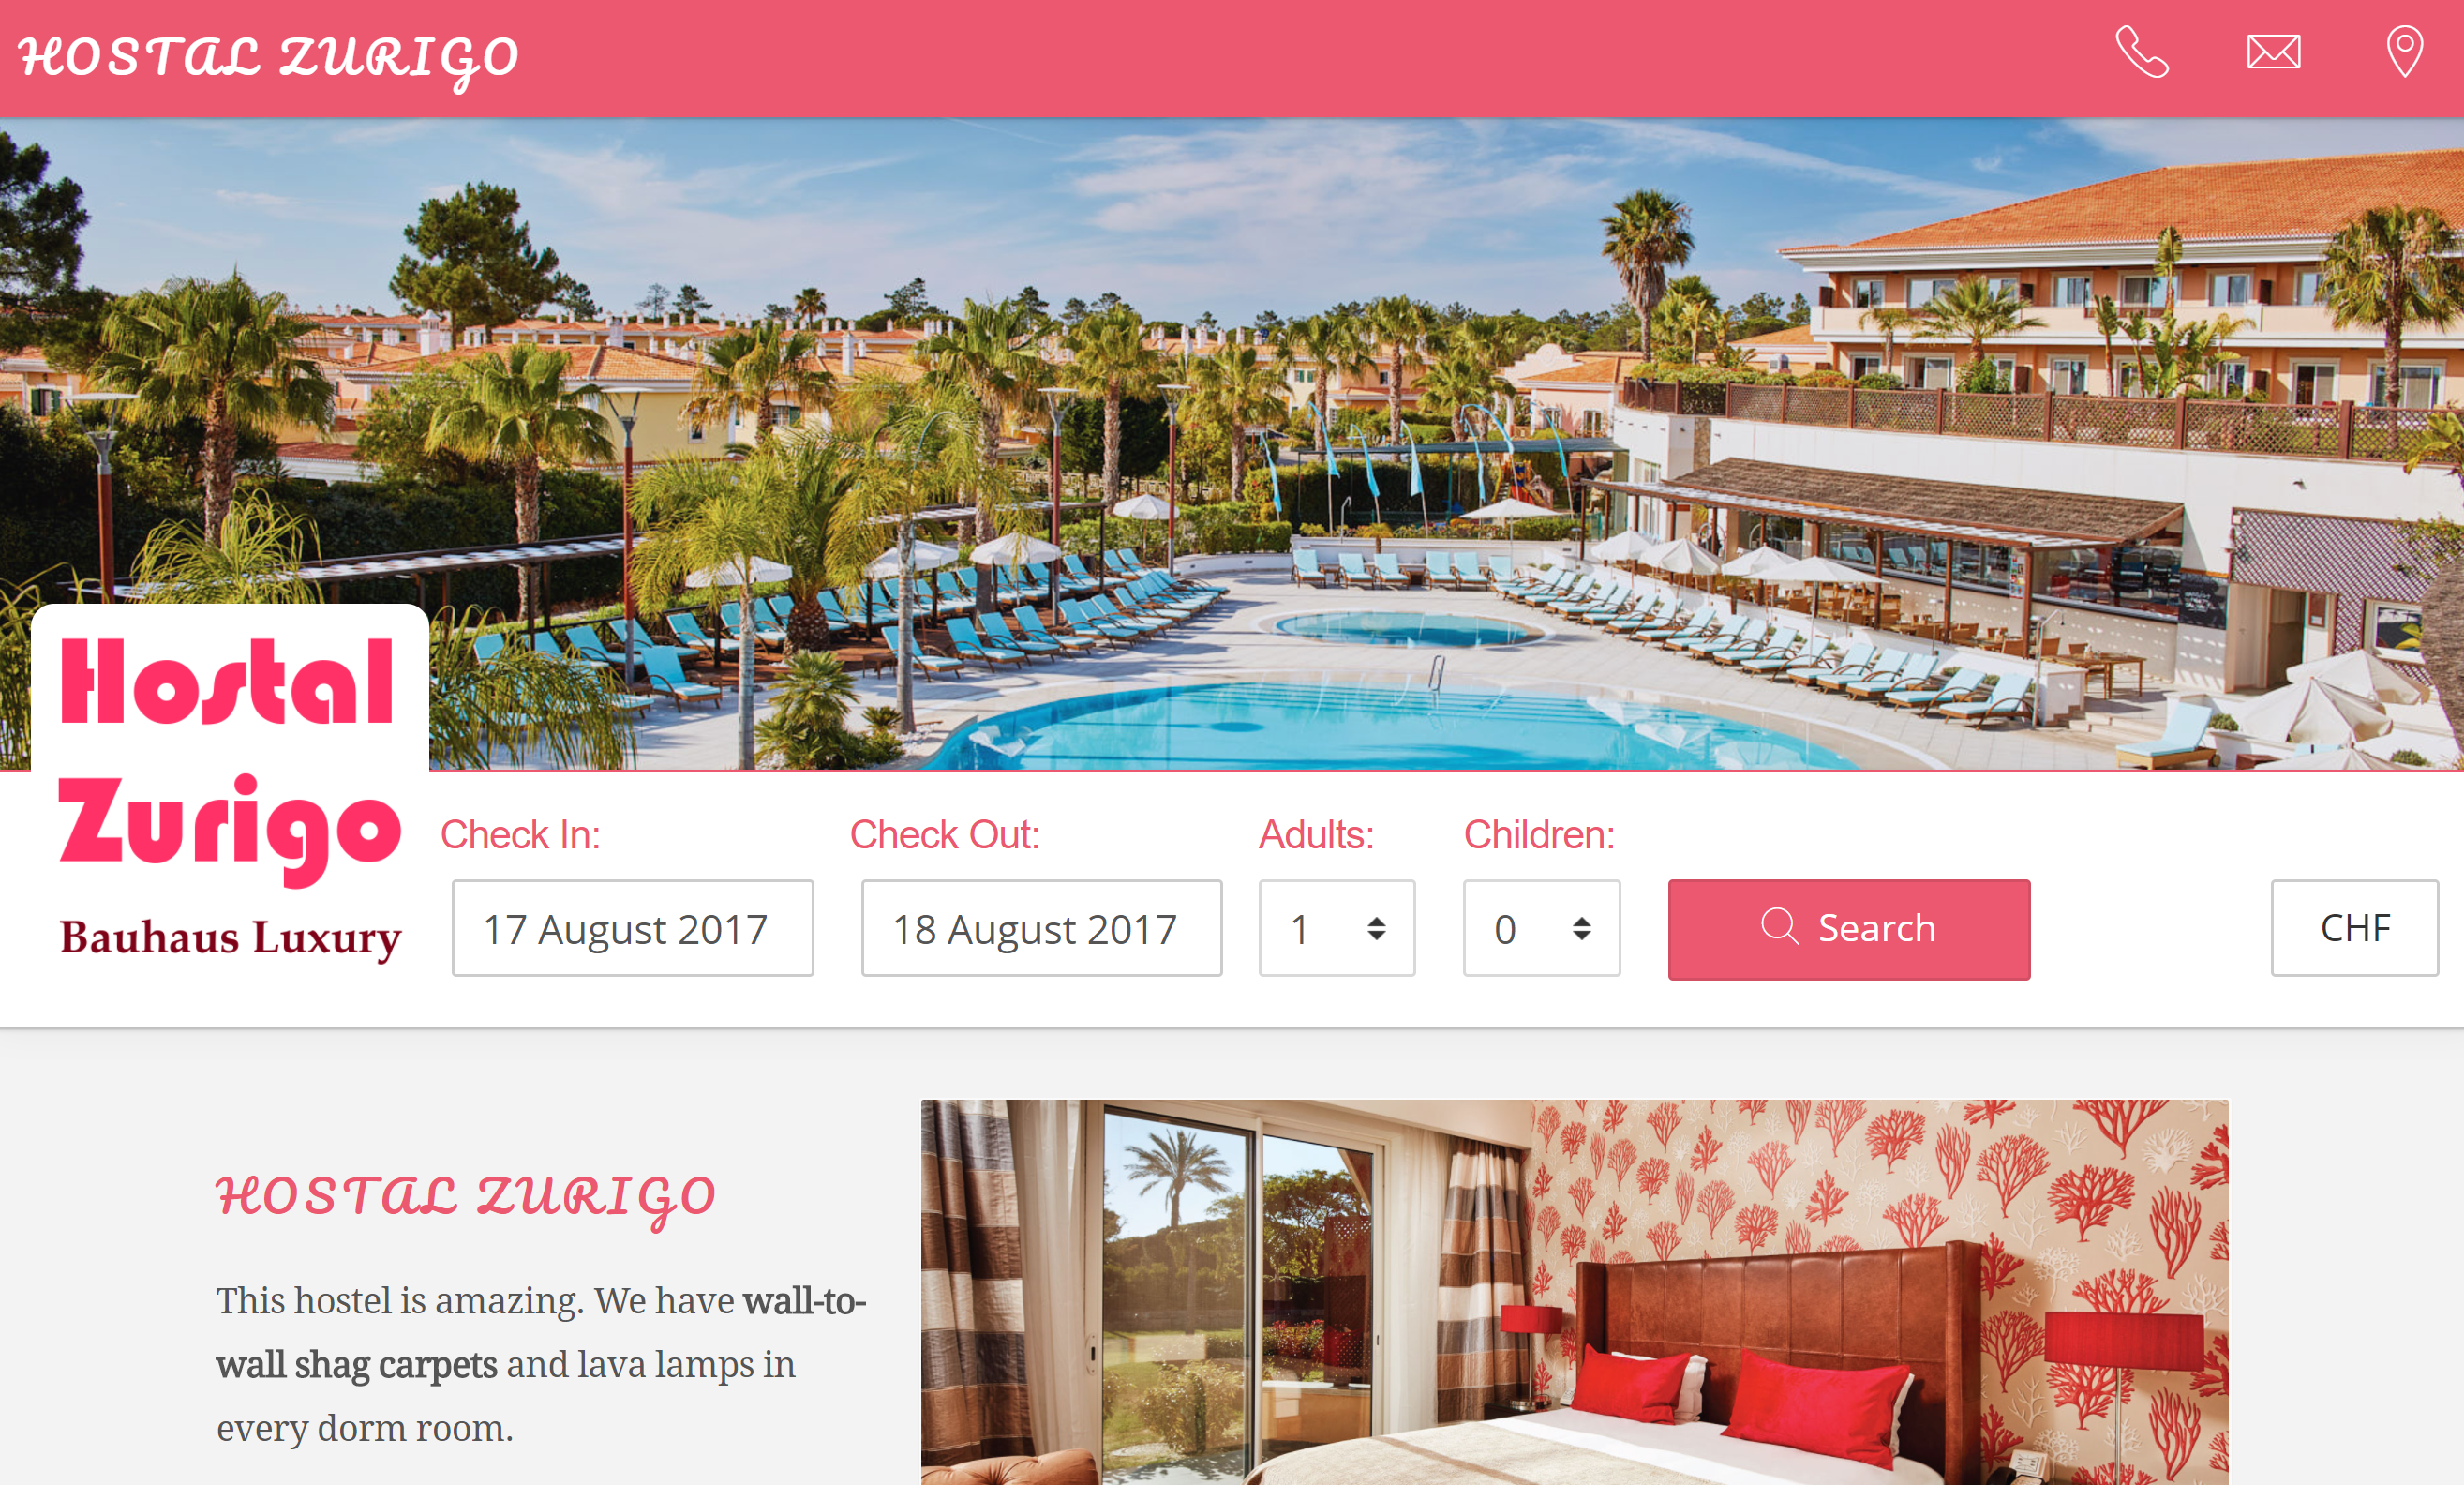 Booking Engine Style Updates The booking engine has been updated to allow further customization, along with a revamped Cosmo theme. To explore what’s new, go to Channel Manager > My Booking Engine in the left navigation menu